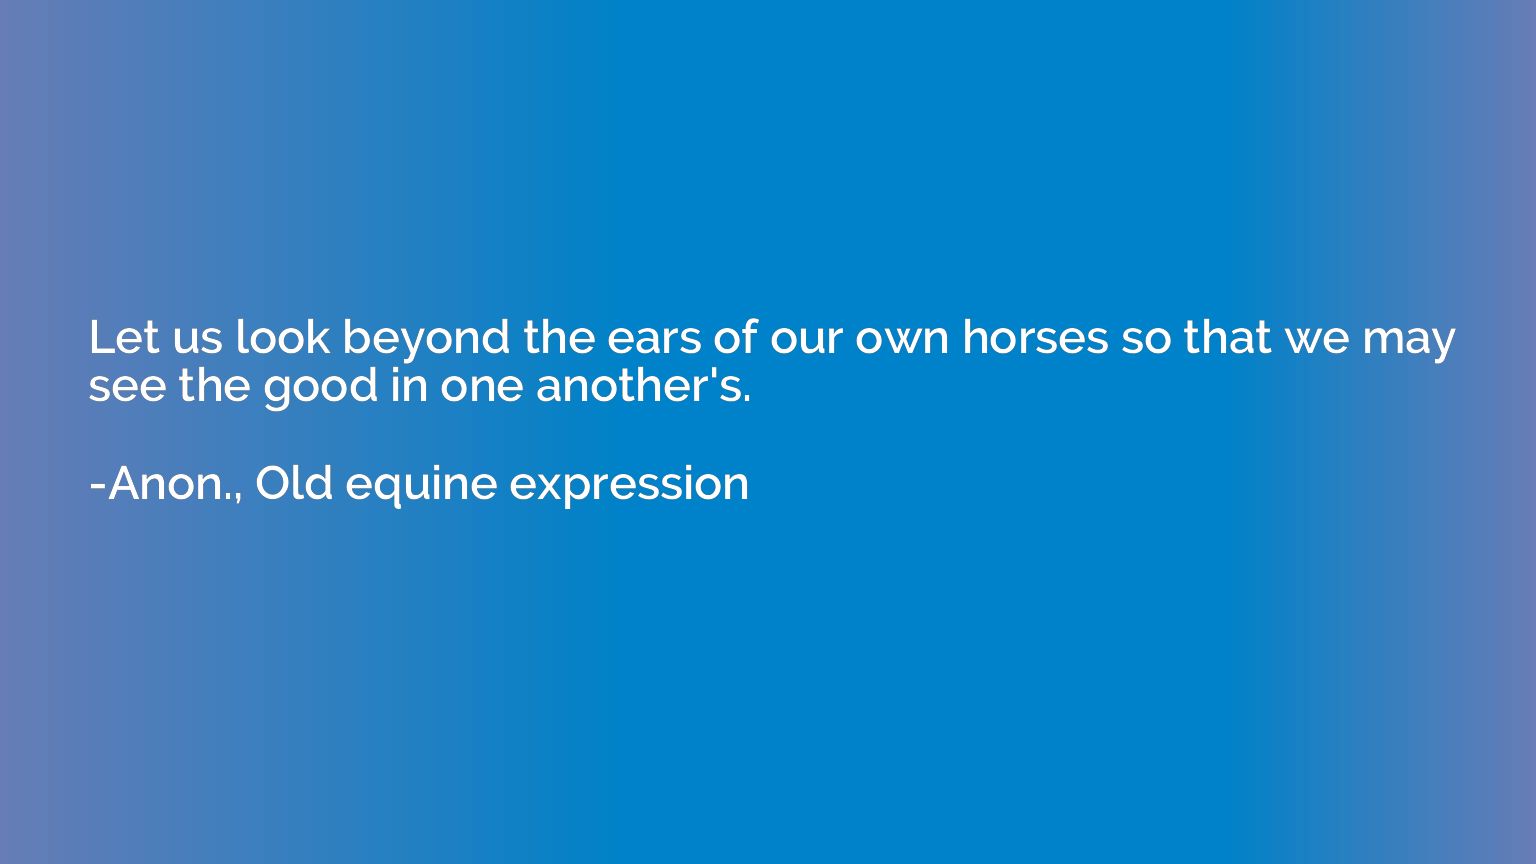 Let us look beyond the ears of our own horses so that we may